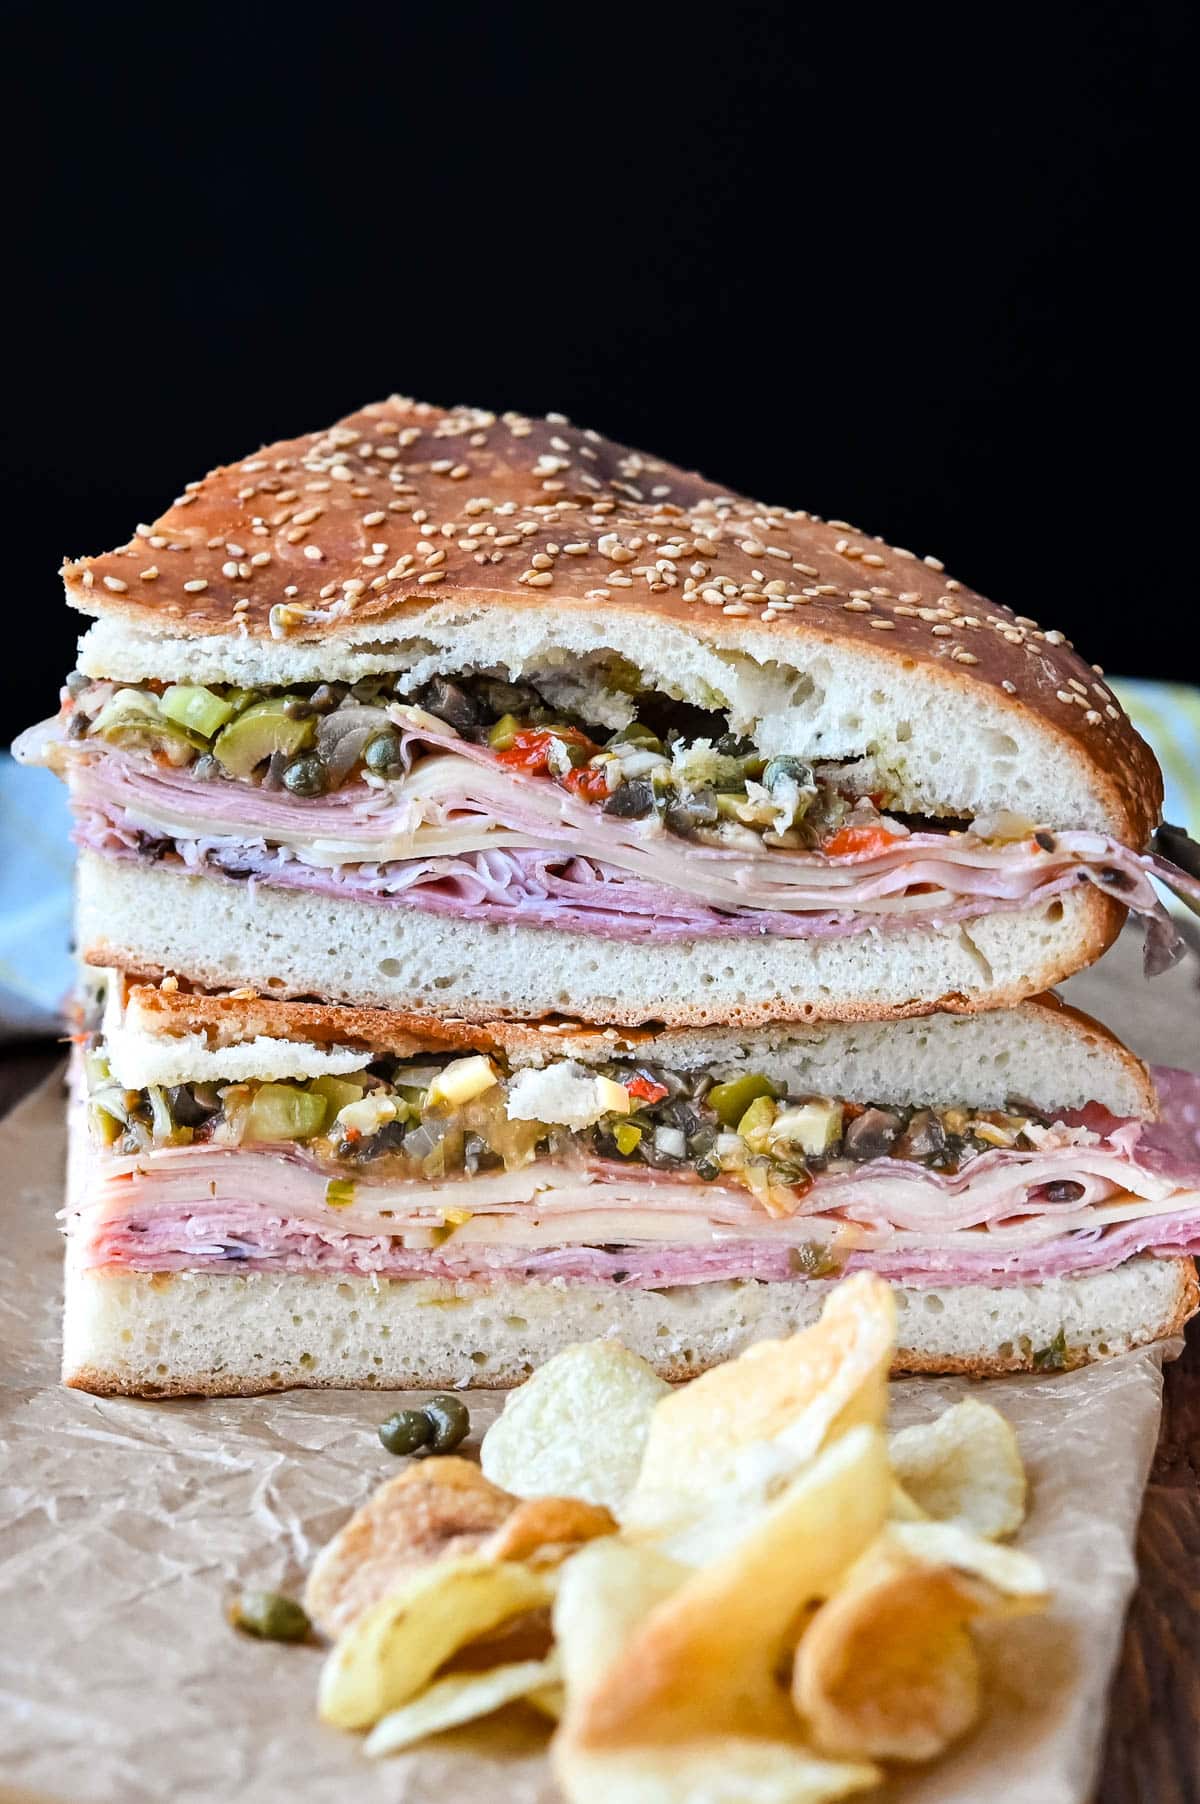 Sliced muffuletta sandwiches stacked on each other with a side of chips.